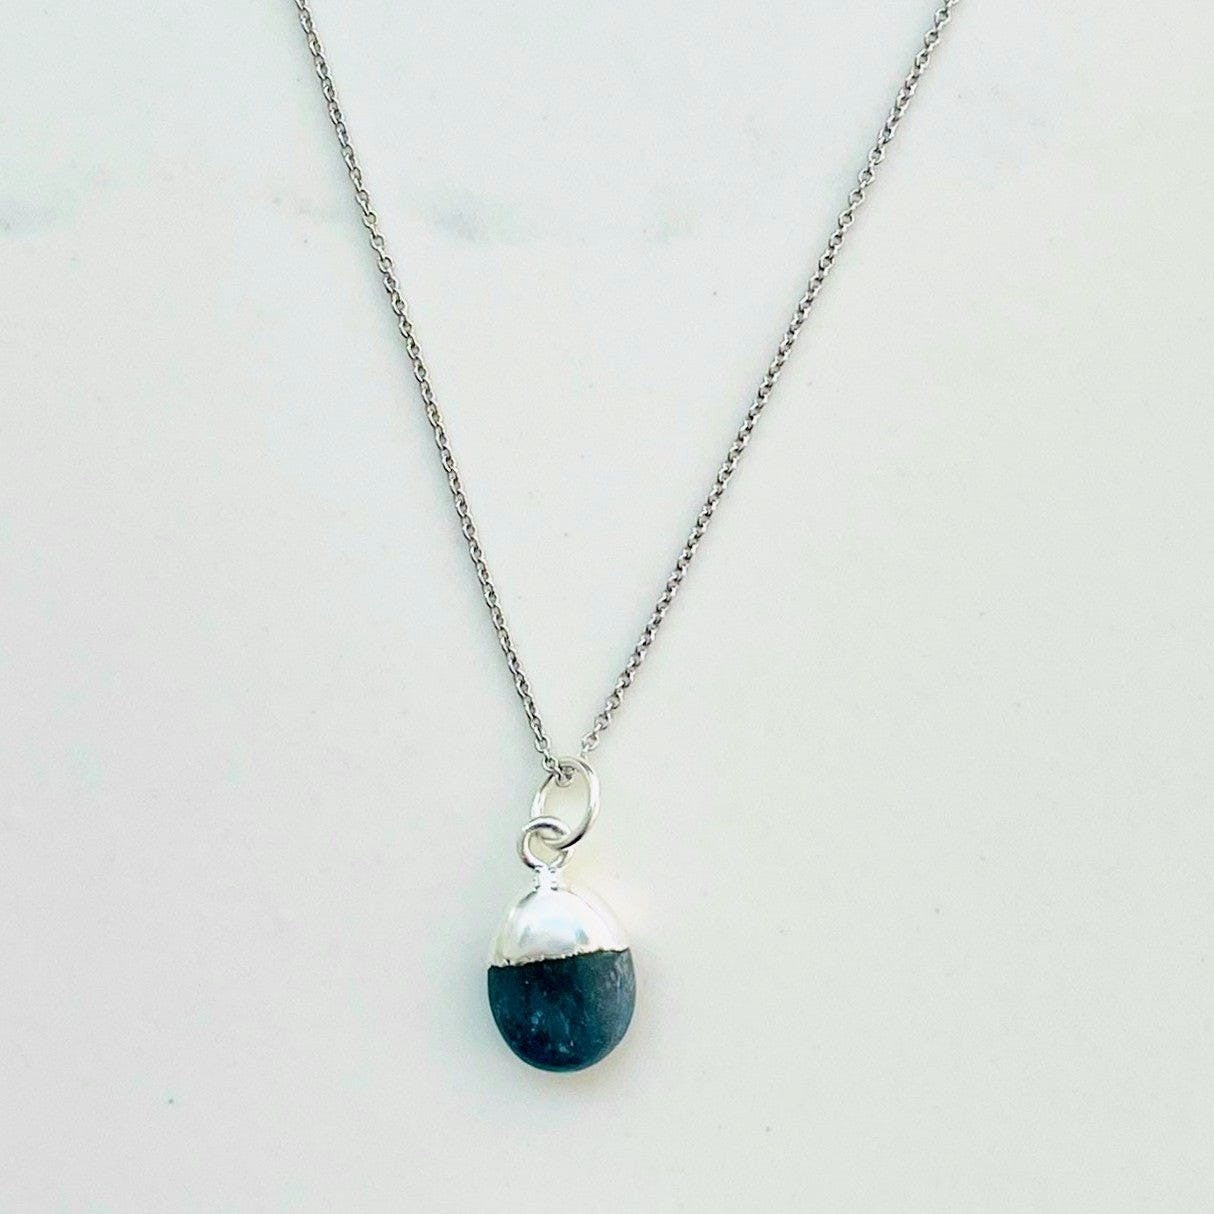 Smooth Tumbled Tanzanite Pendant Necklace